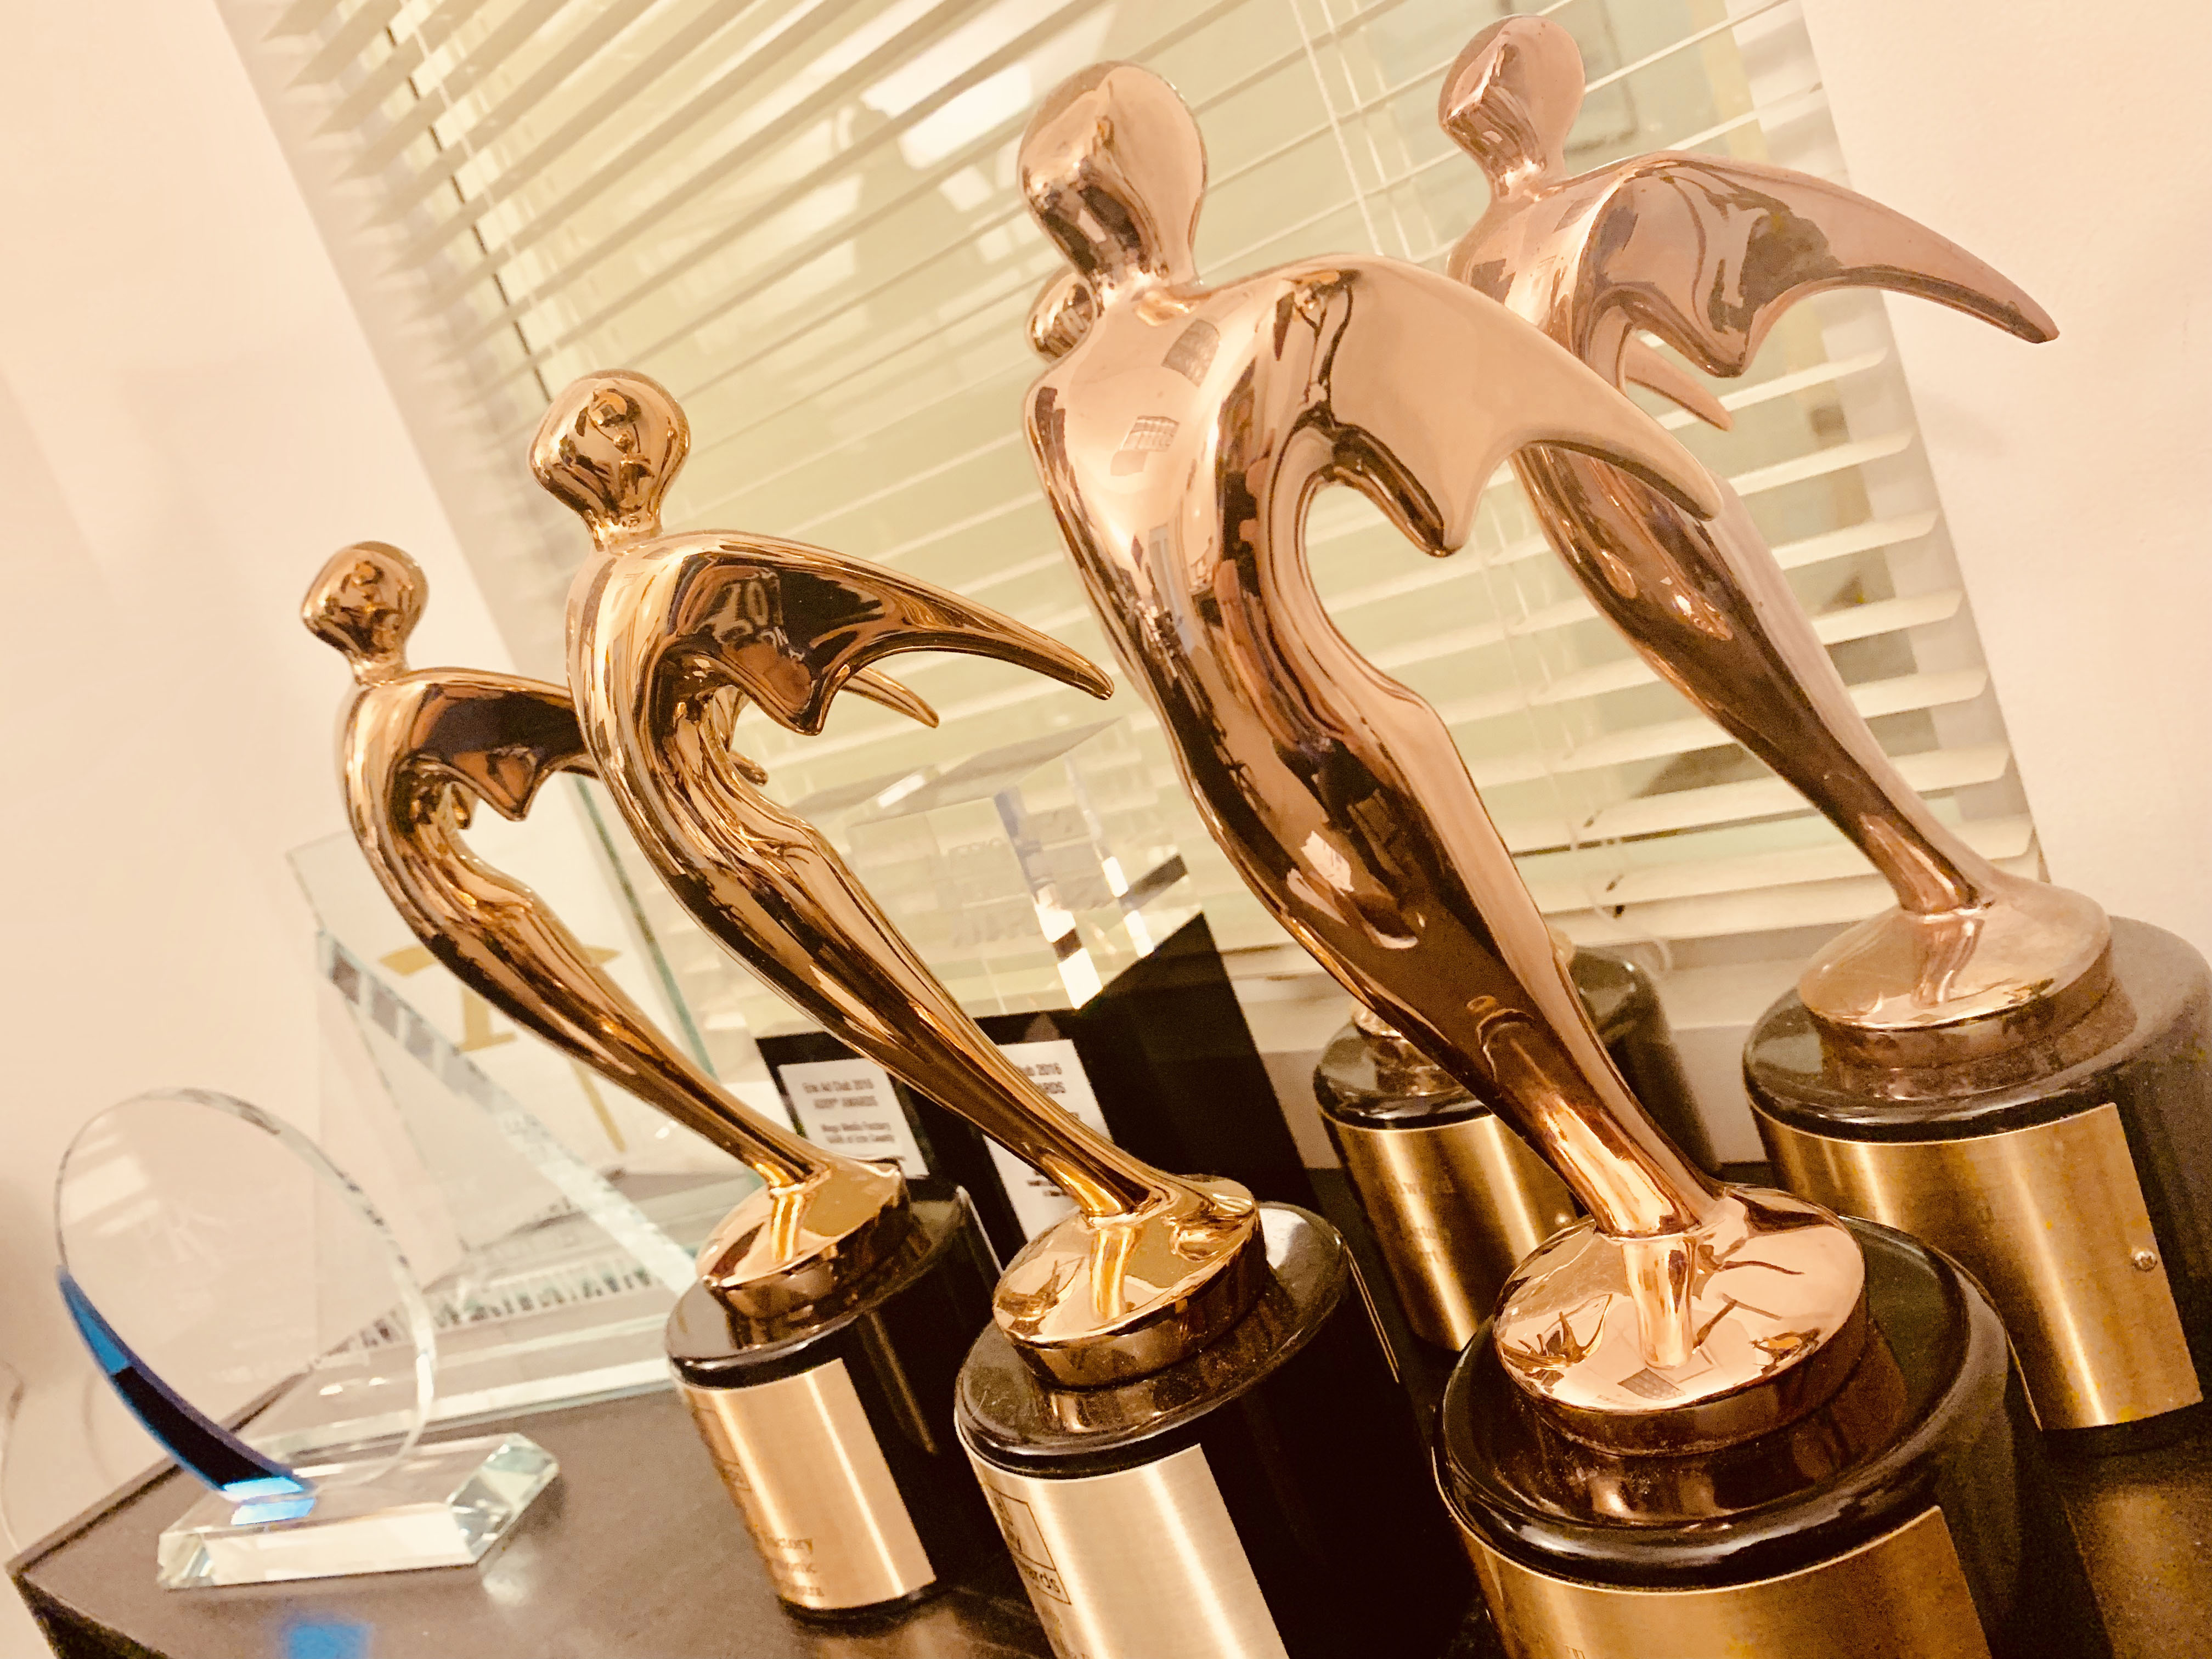 Telly award and other awards on a book shelf